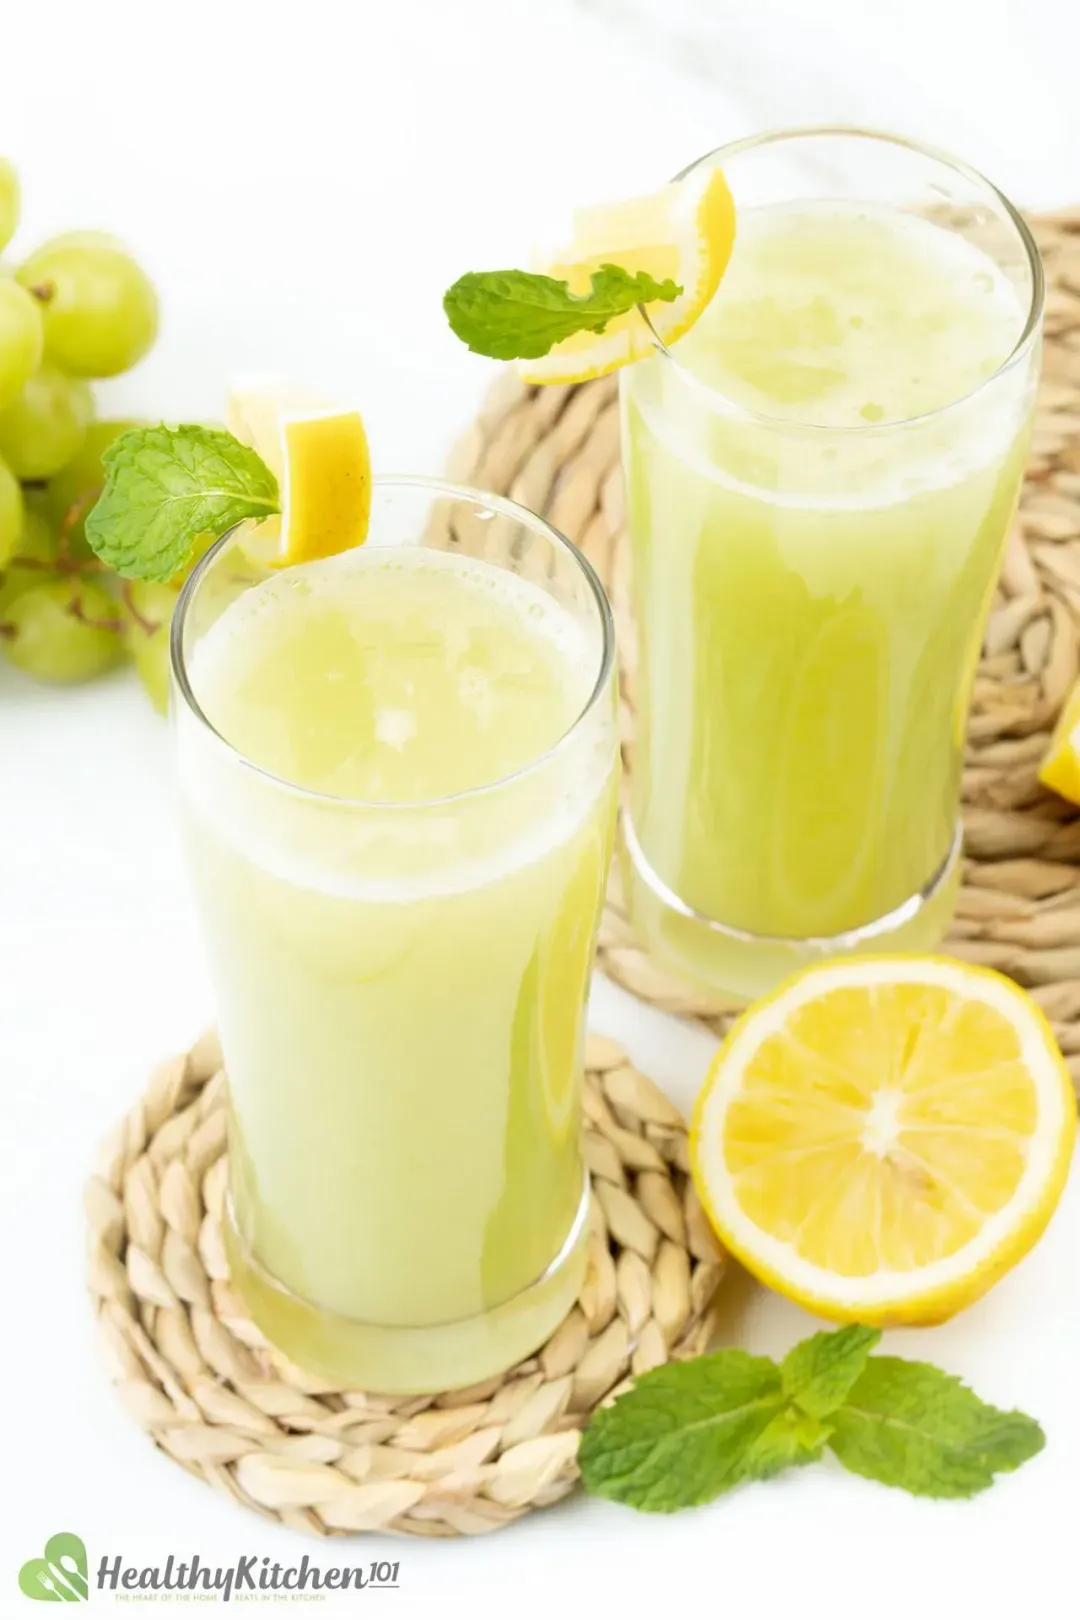 Two glasses of green grape juice, garnished with mints and lemons